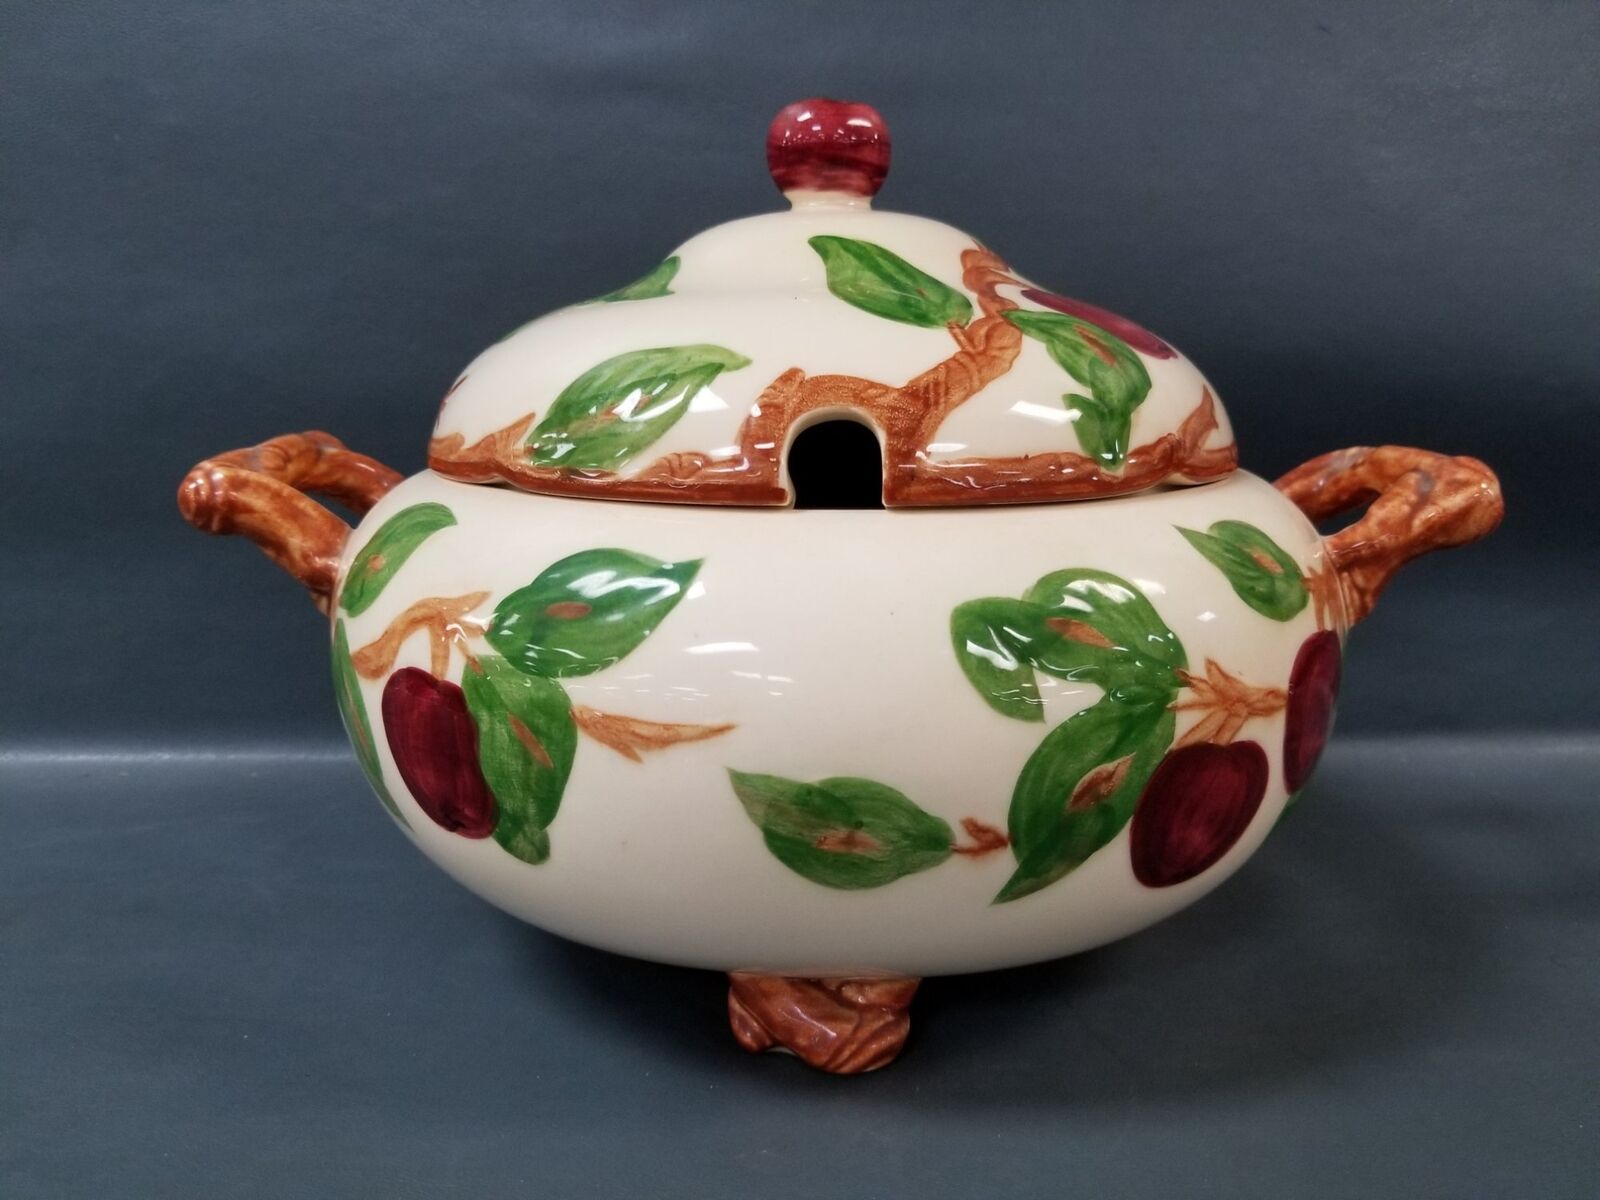 Vtg Franciscan Ware Apple Blossom Footed Soup Tureen W/ Handles No Ladle